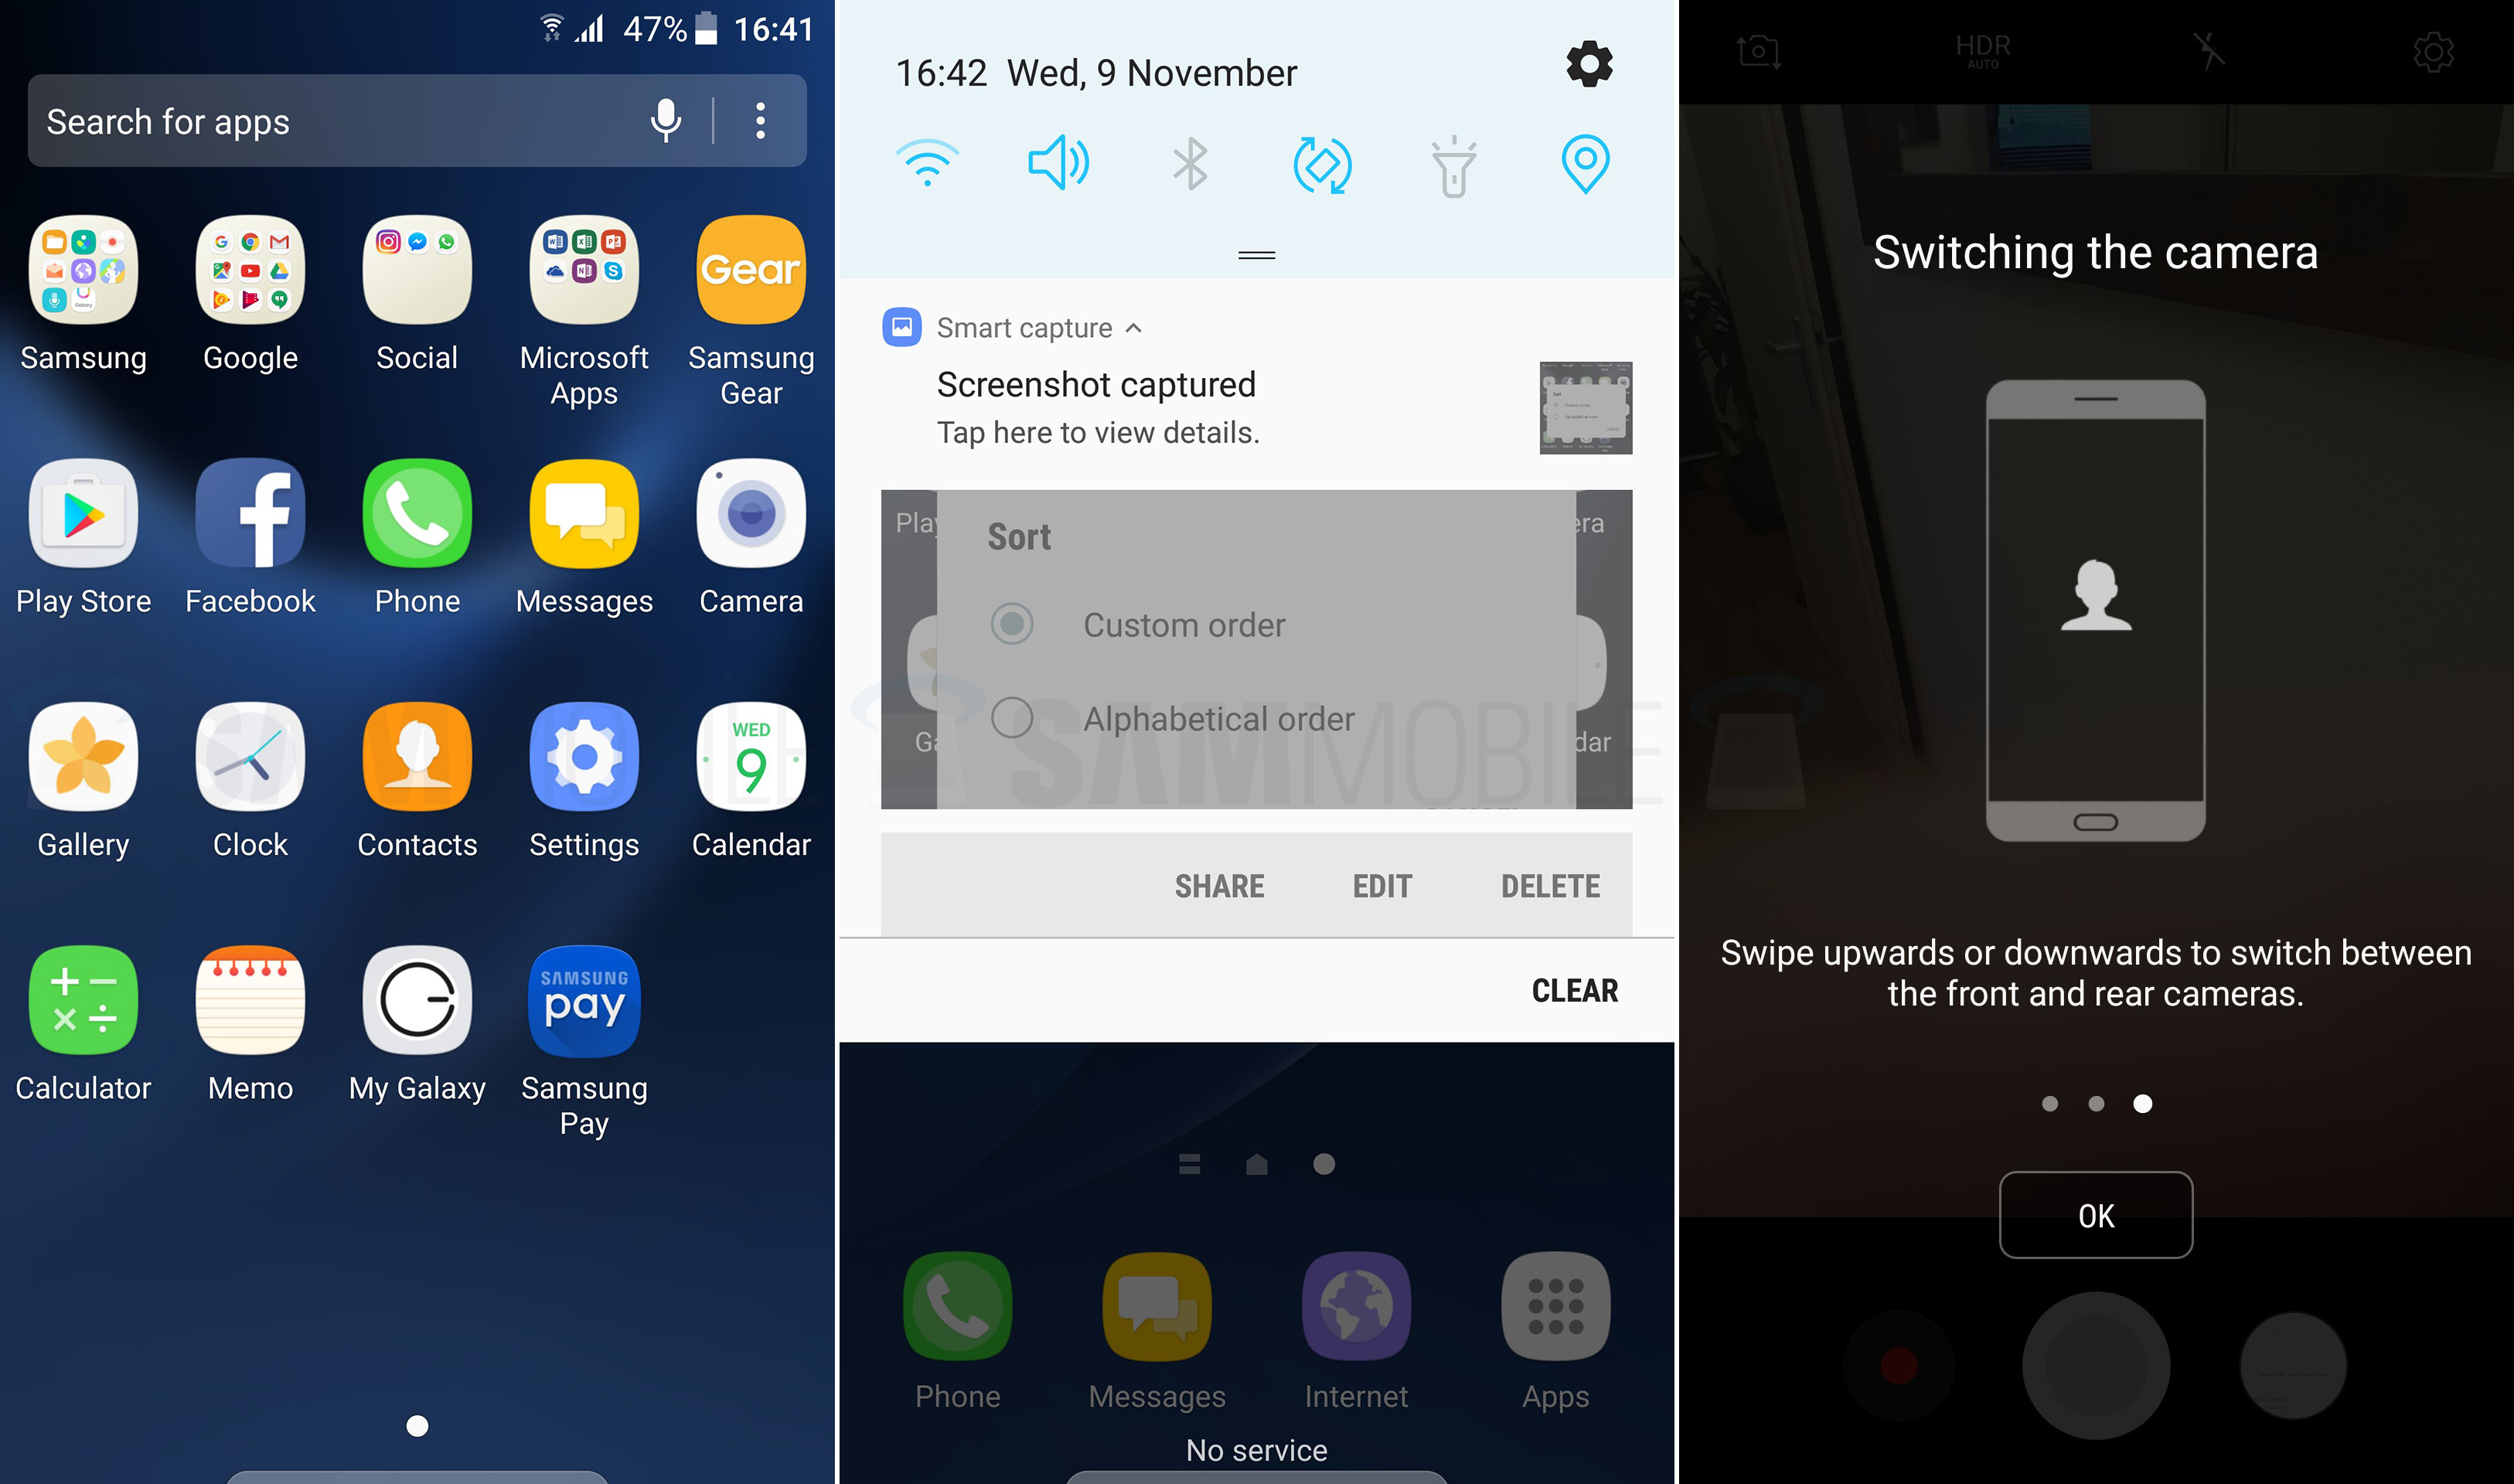 Samsung's version of Android 7.0 Nougat shown off in new screenshots